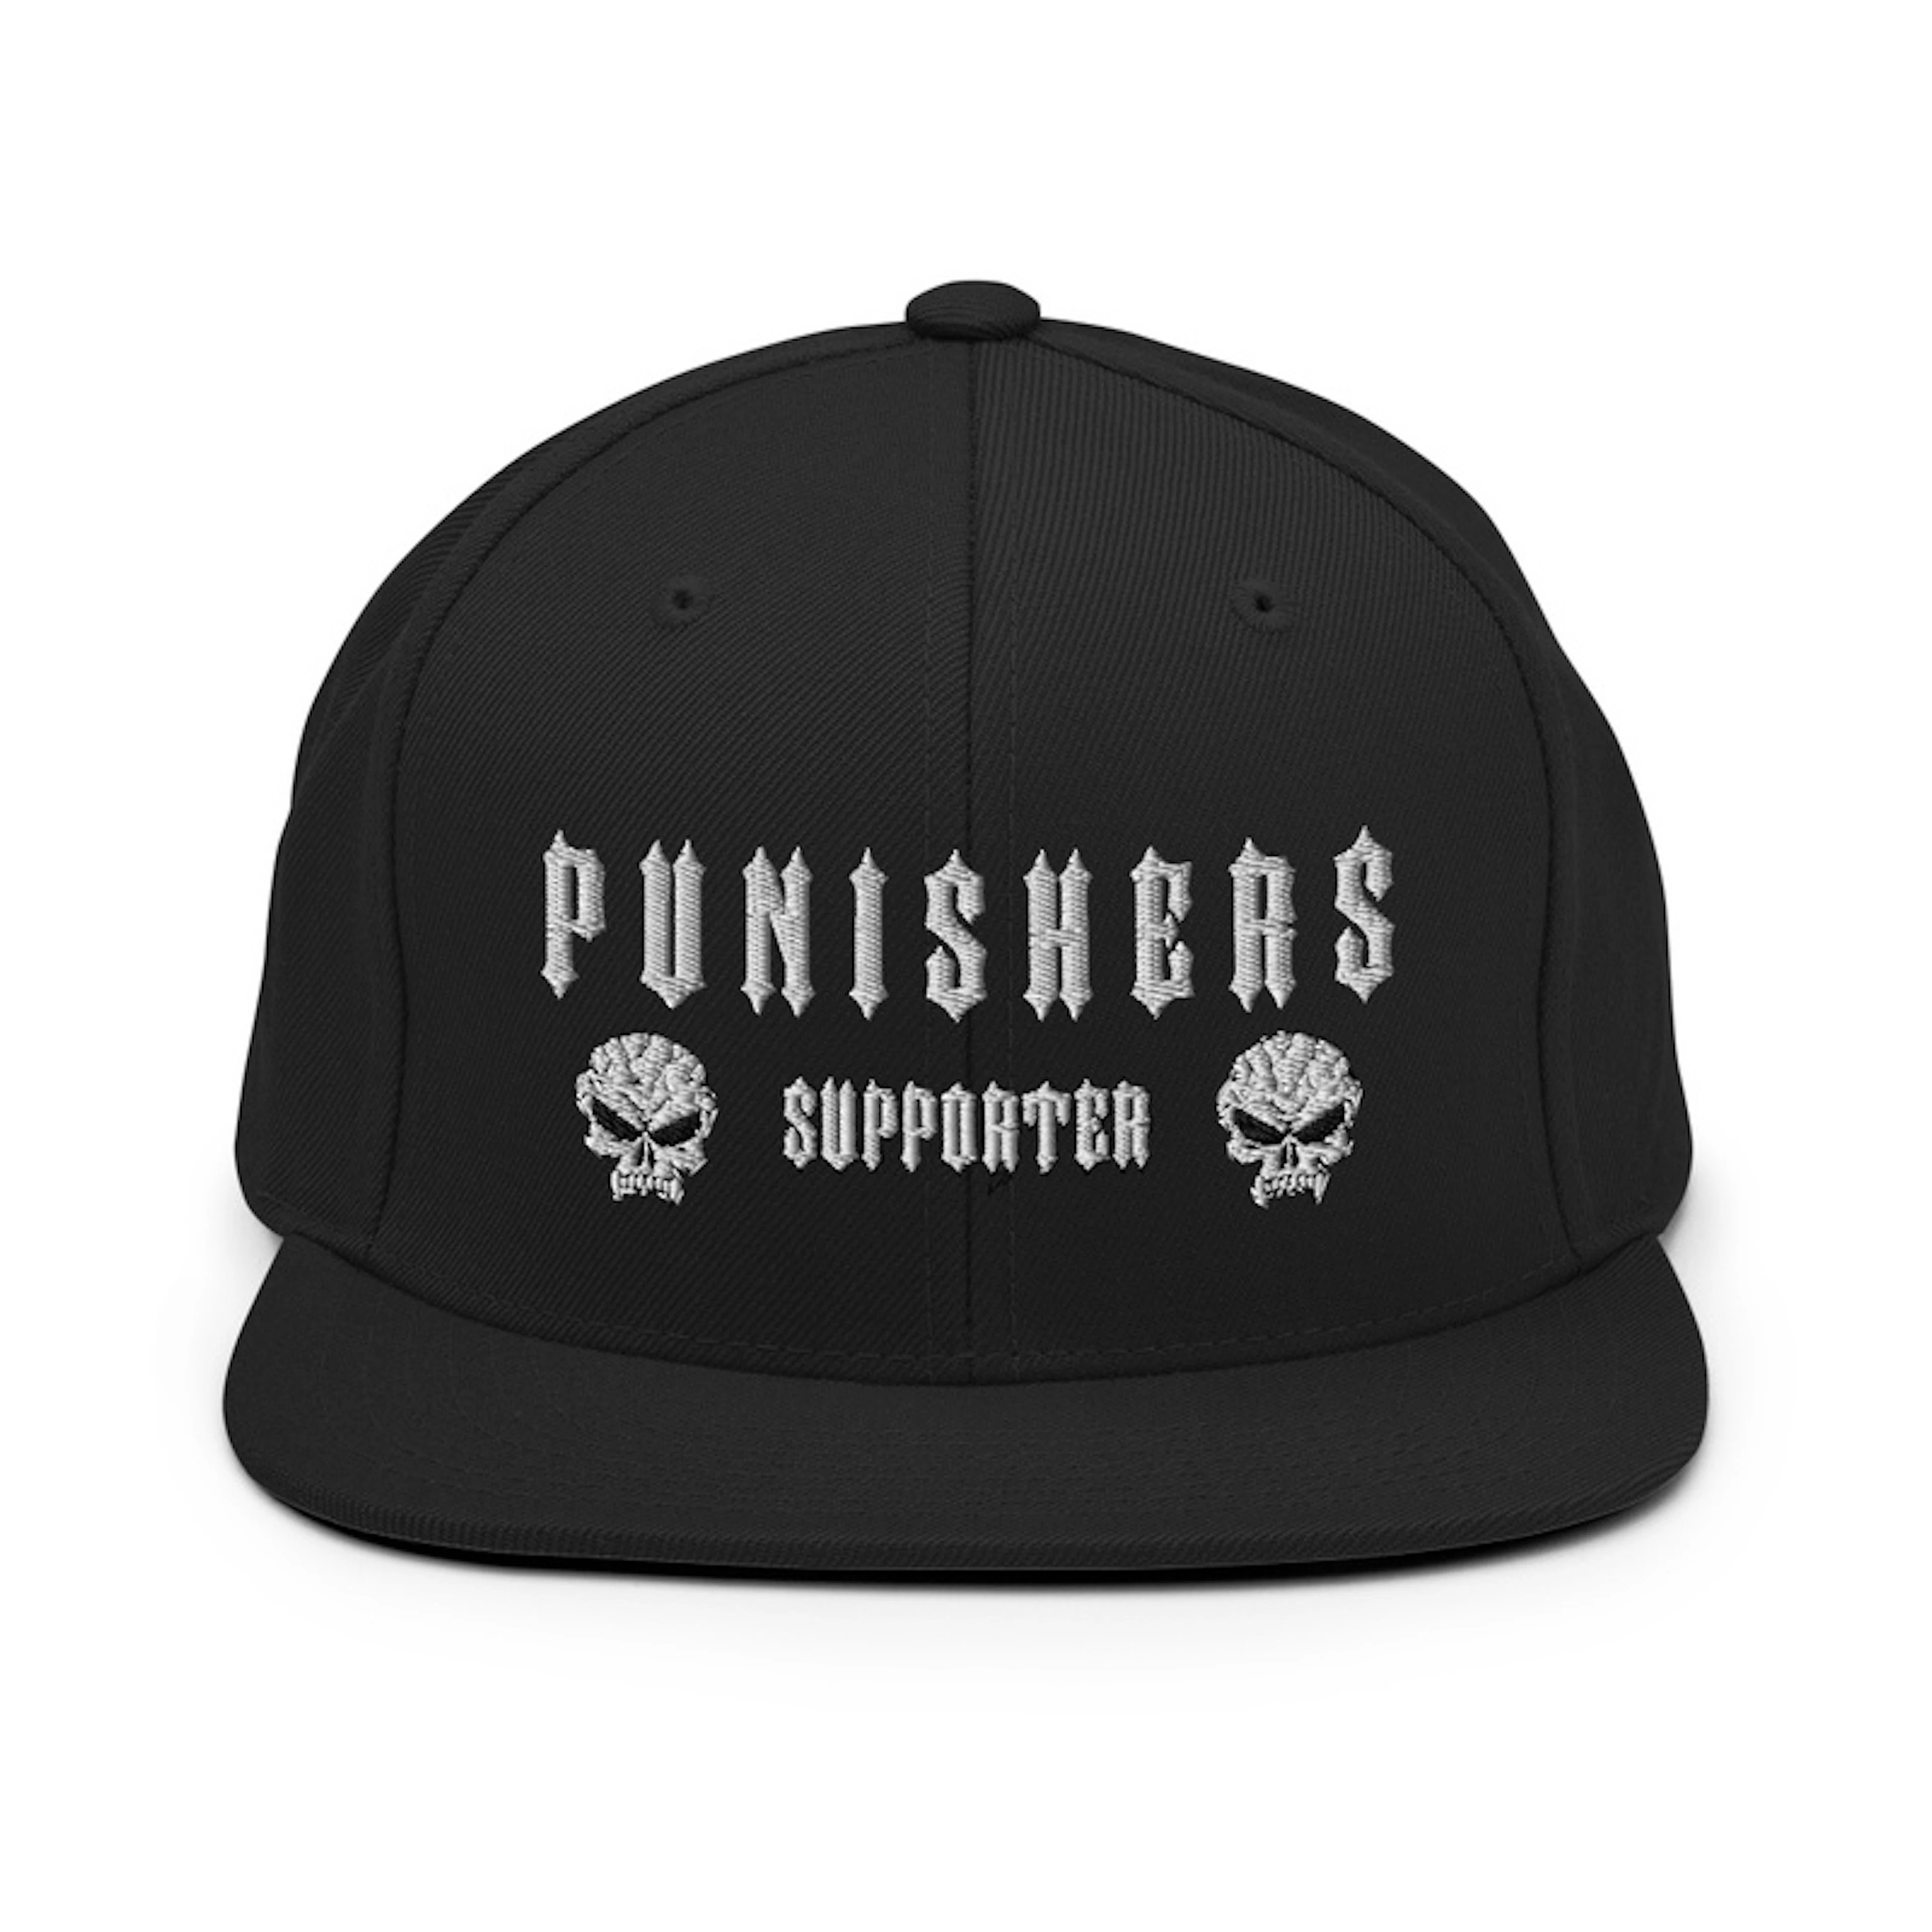 Punishers Supporter Hat W/ Guardian